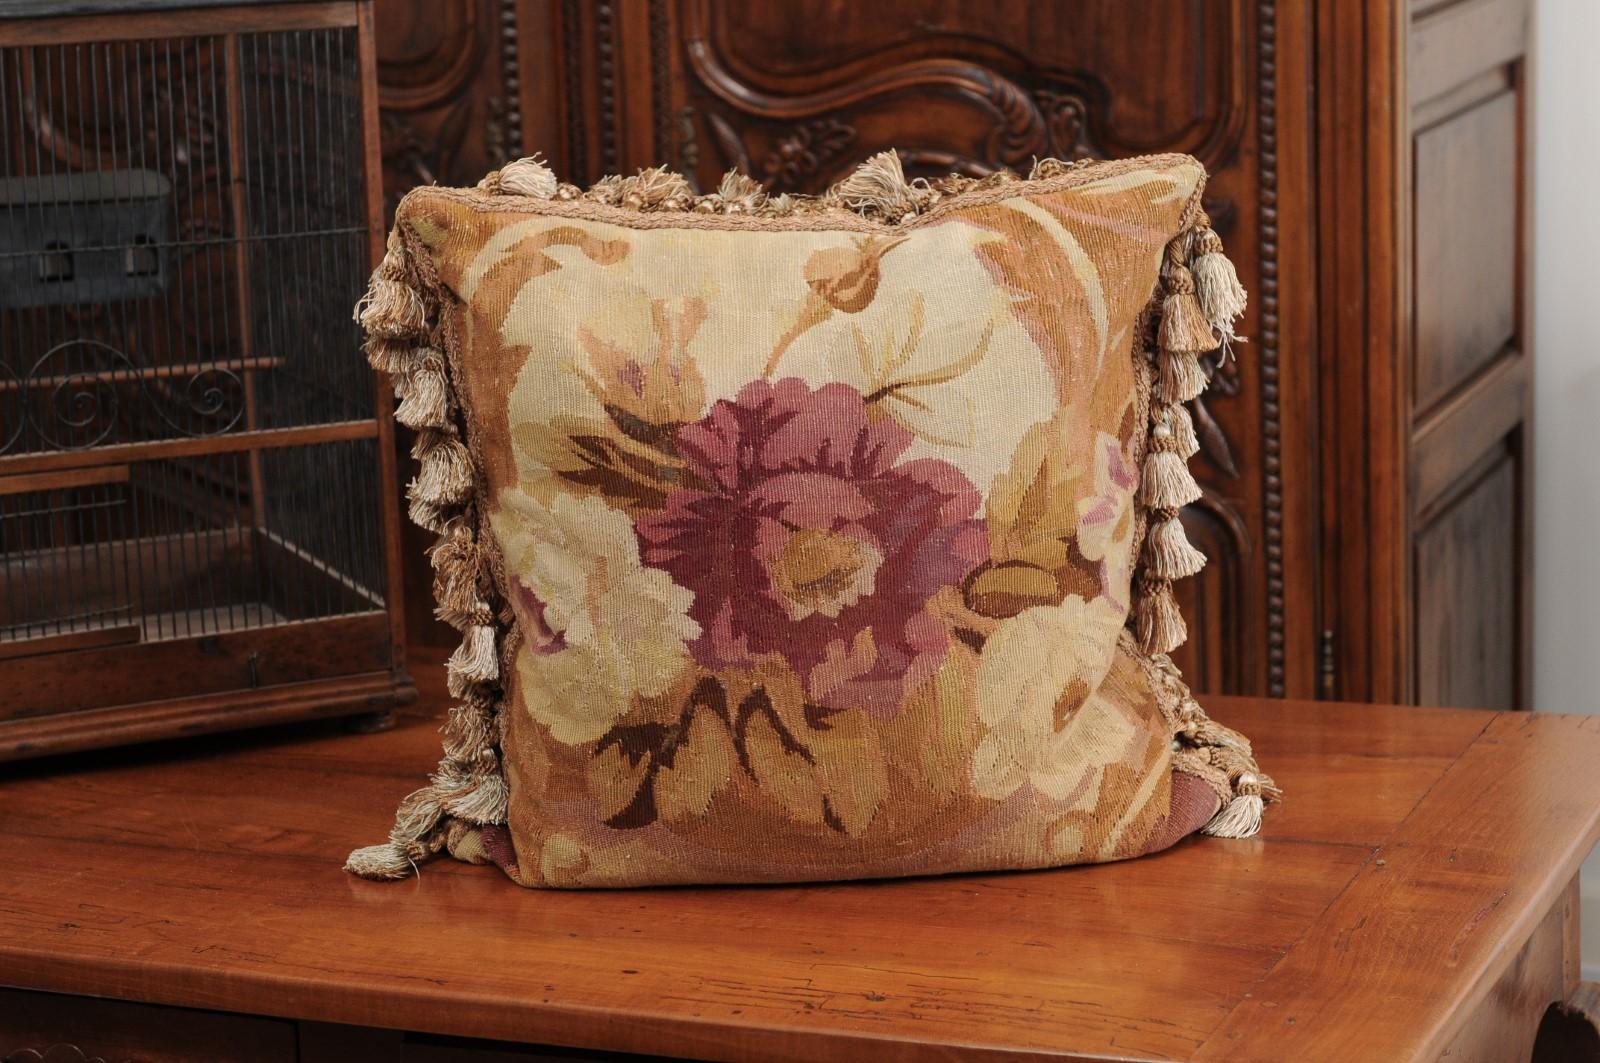 A French 19th century Aubusson tapestry pillow, with floral décor and tassels. Created during the 19th century in the Aubusson tapestry manufacture located in central France, this pillow features purple, pink and white roses, perfectly accented by